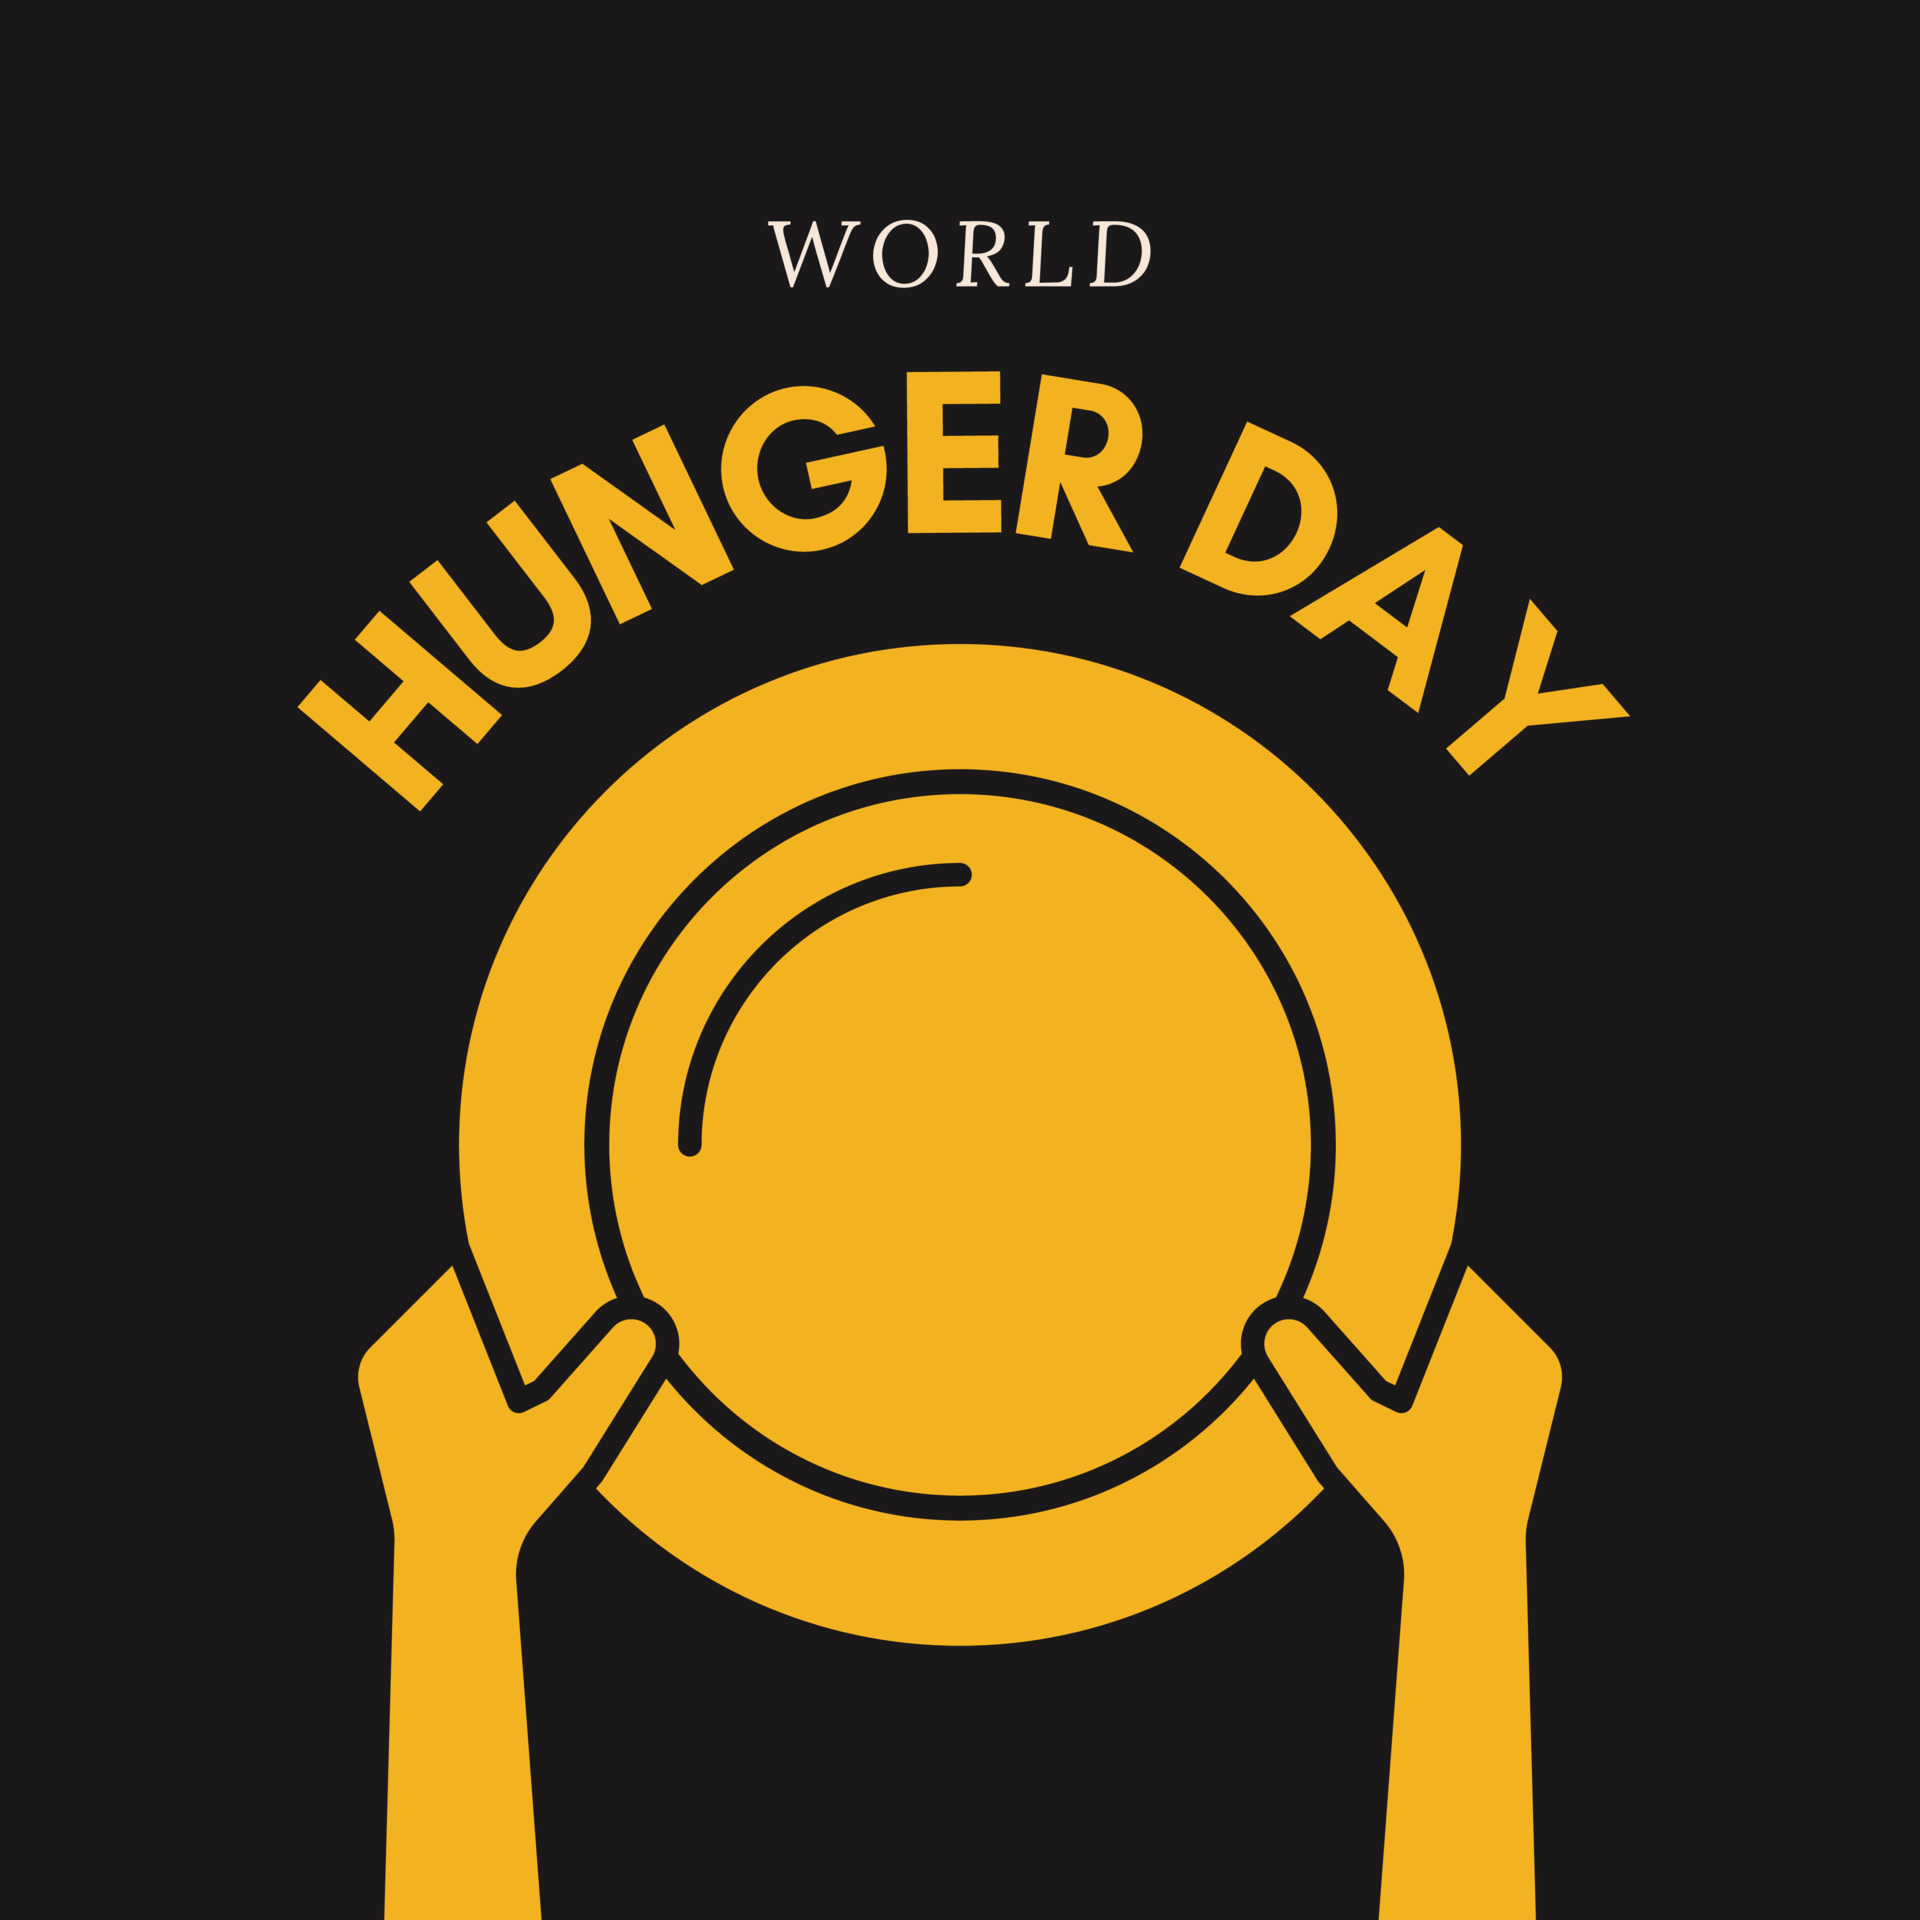 world hunger day poster suitable for social media posts 23291543 Vector